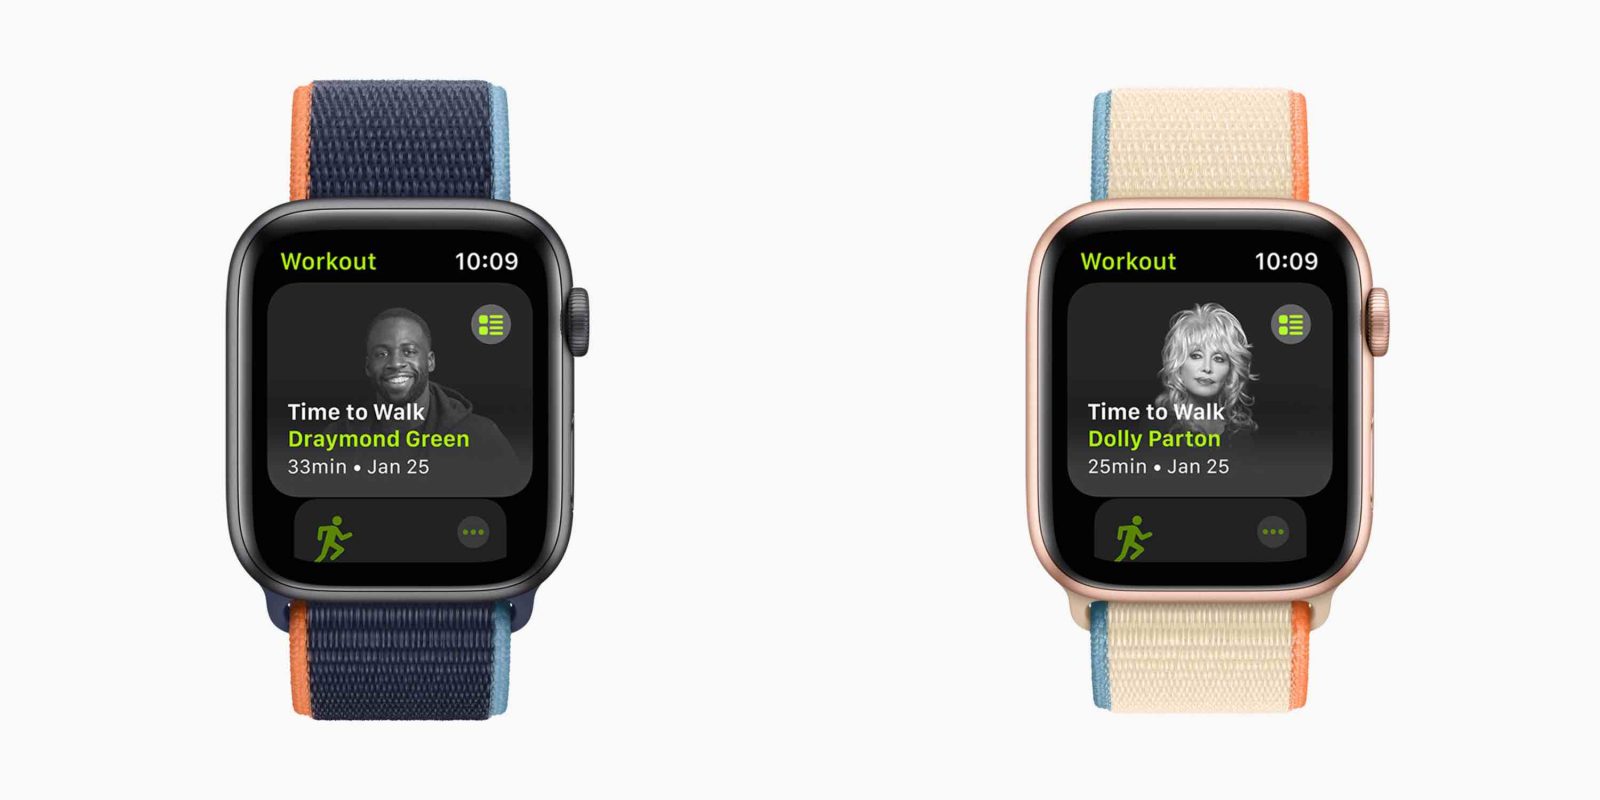 How to use Apple Watch Time to Walk feature walkthrough